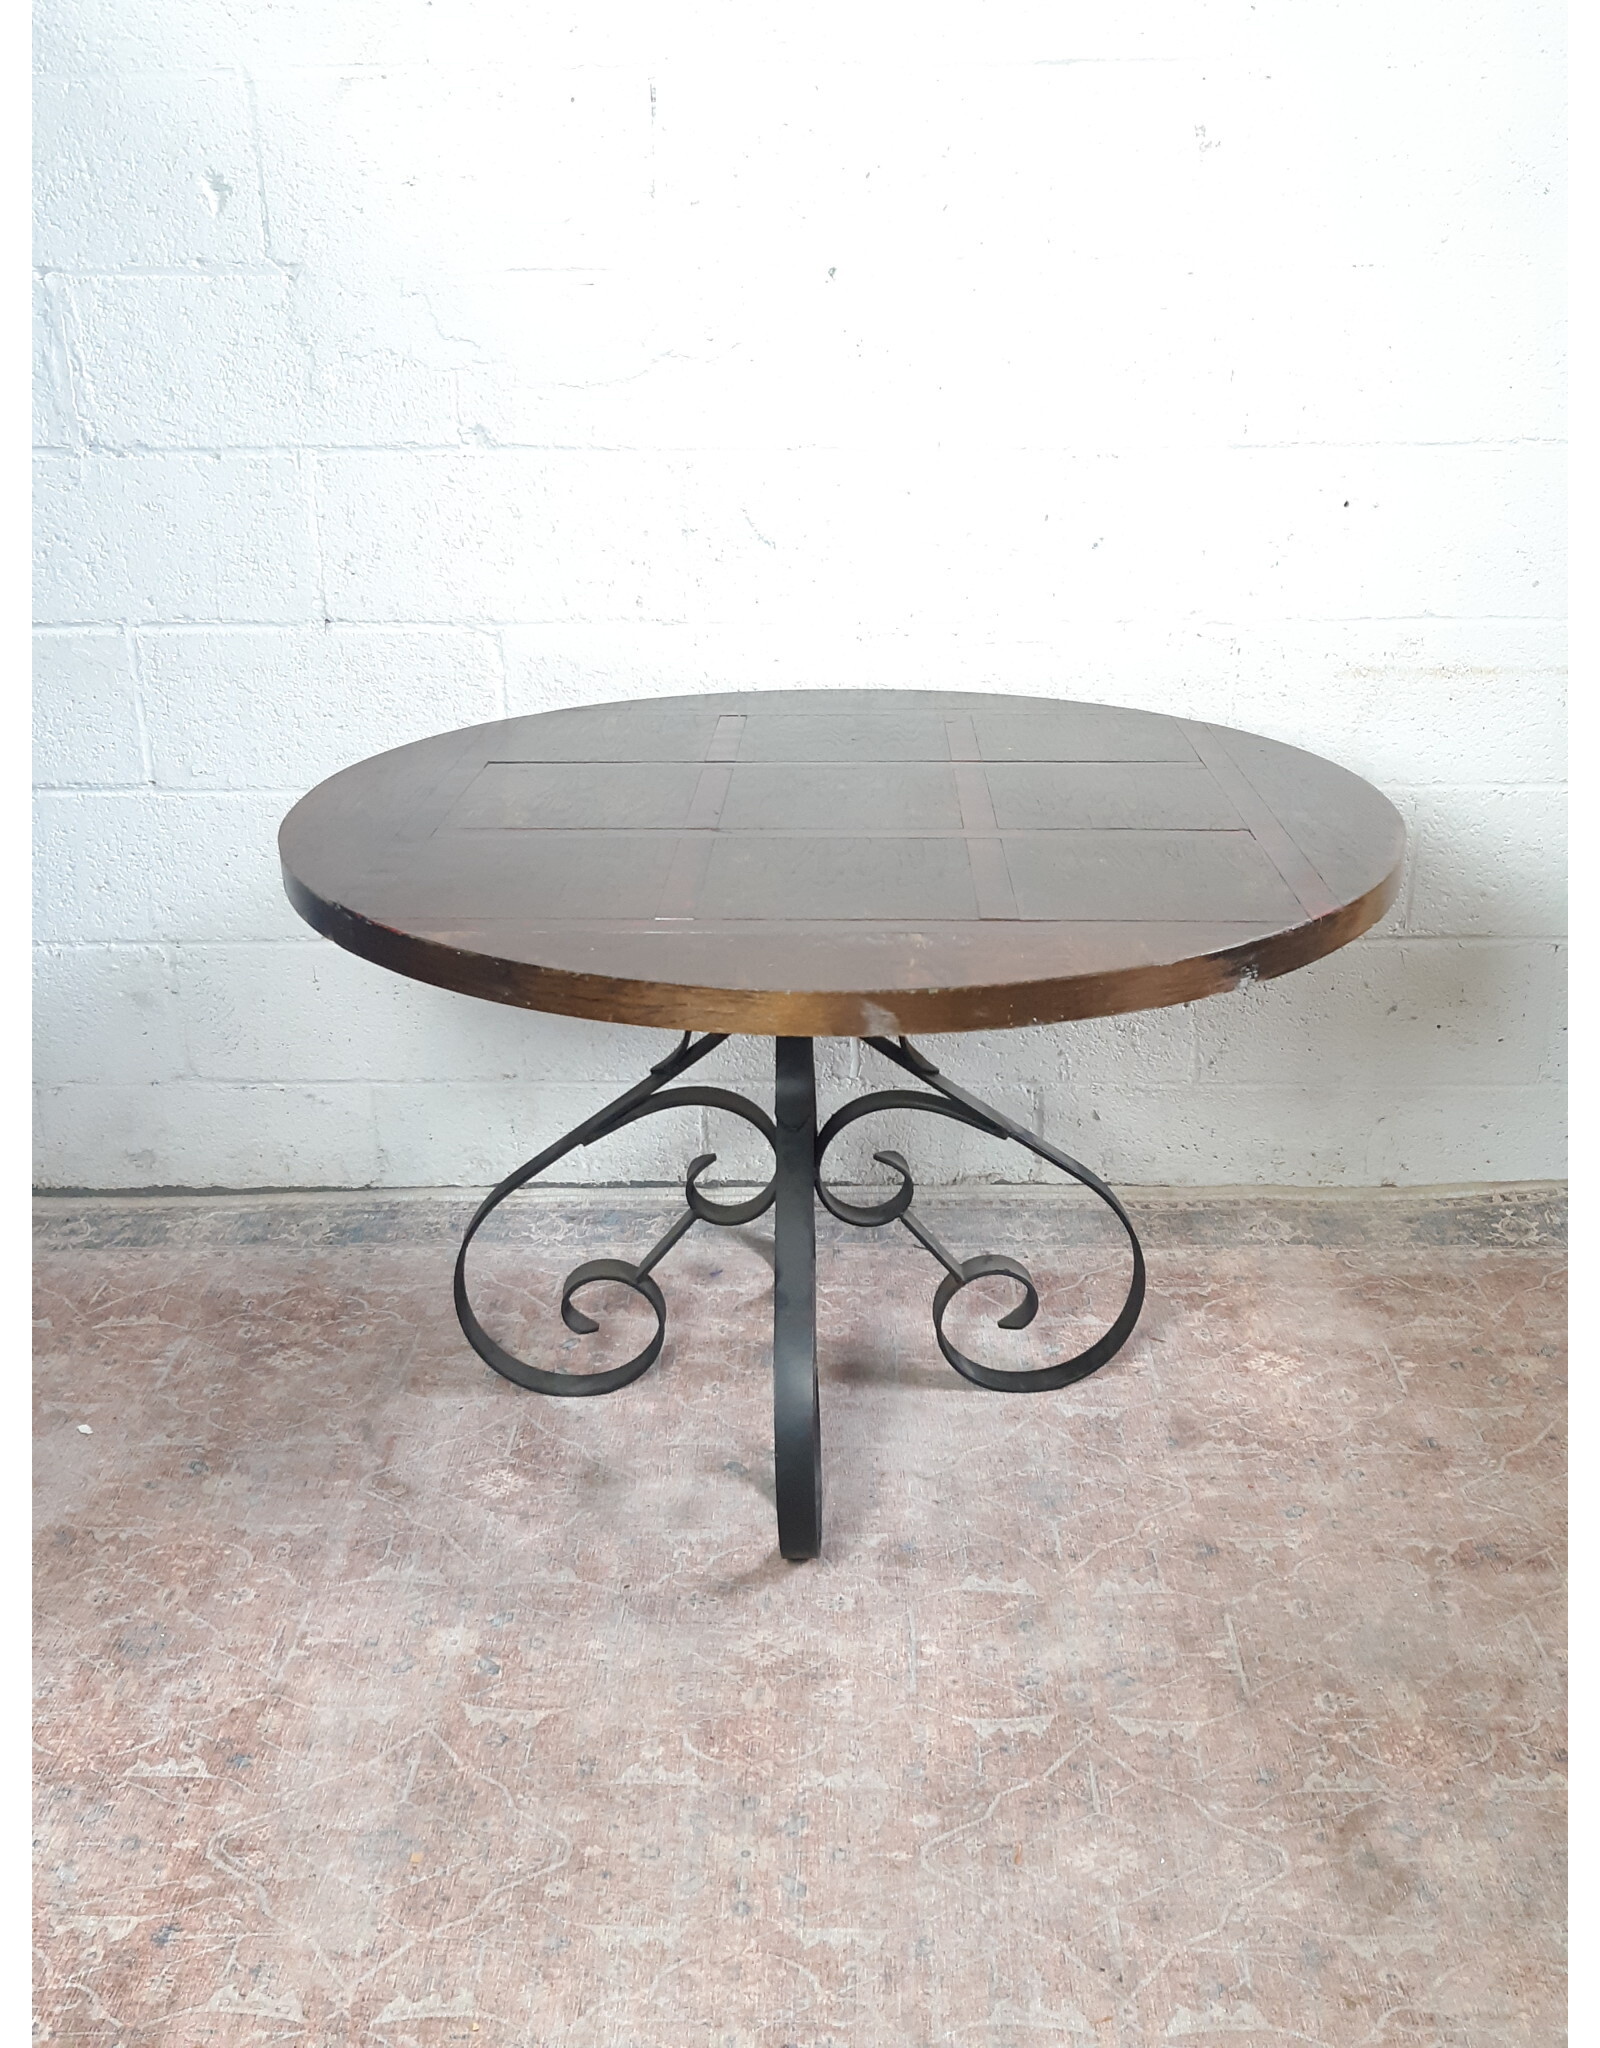 Roman Round Dining Table With Iron Brass Legs & Acacia Wood Top